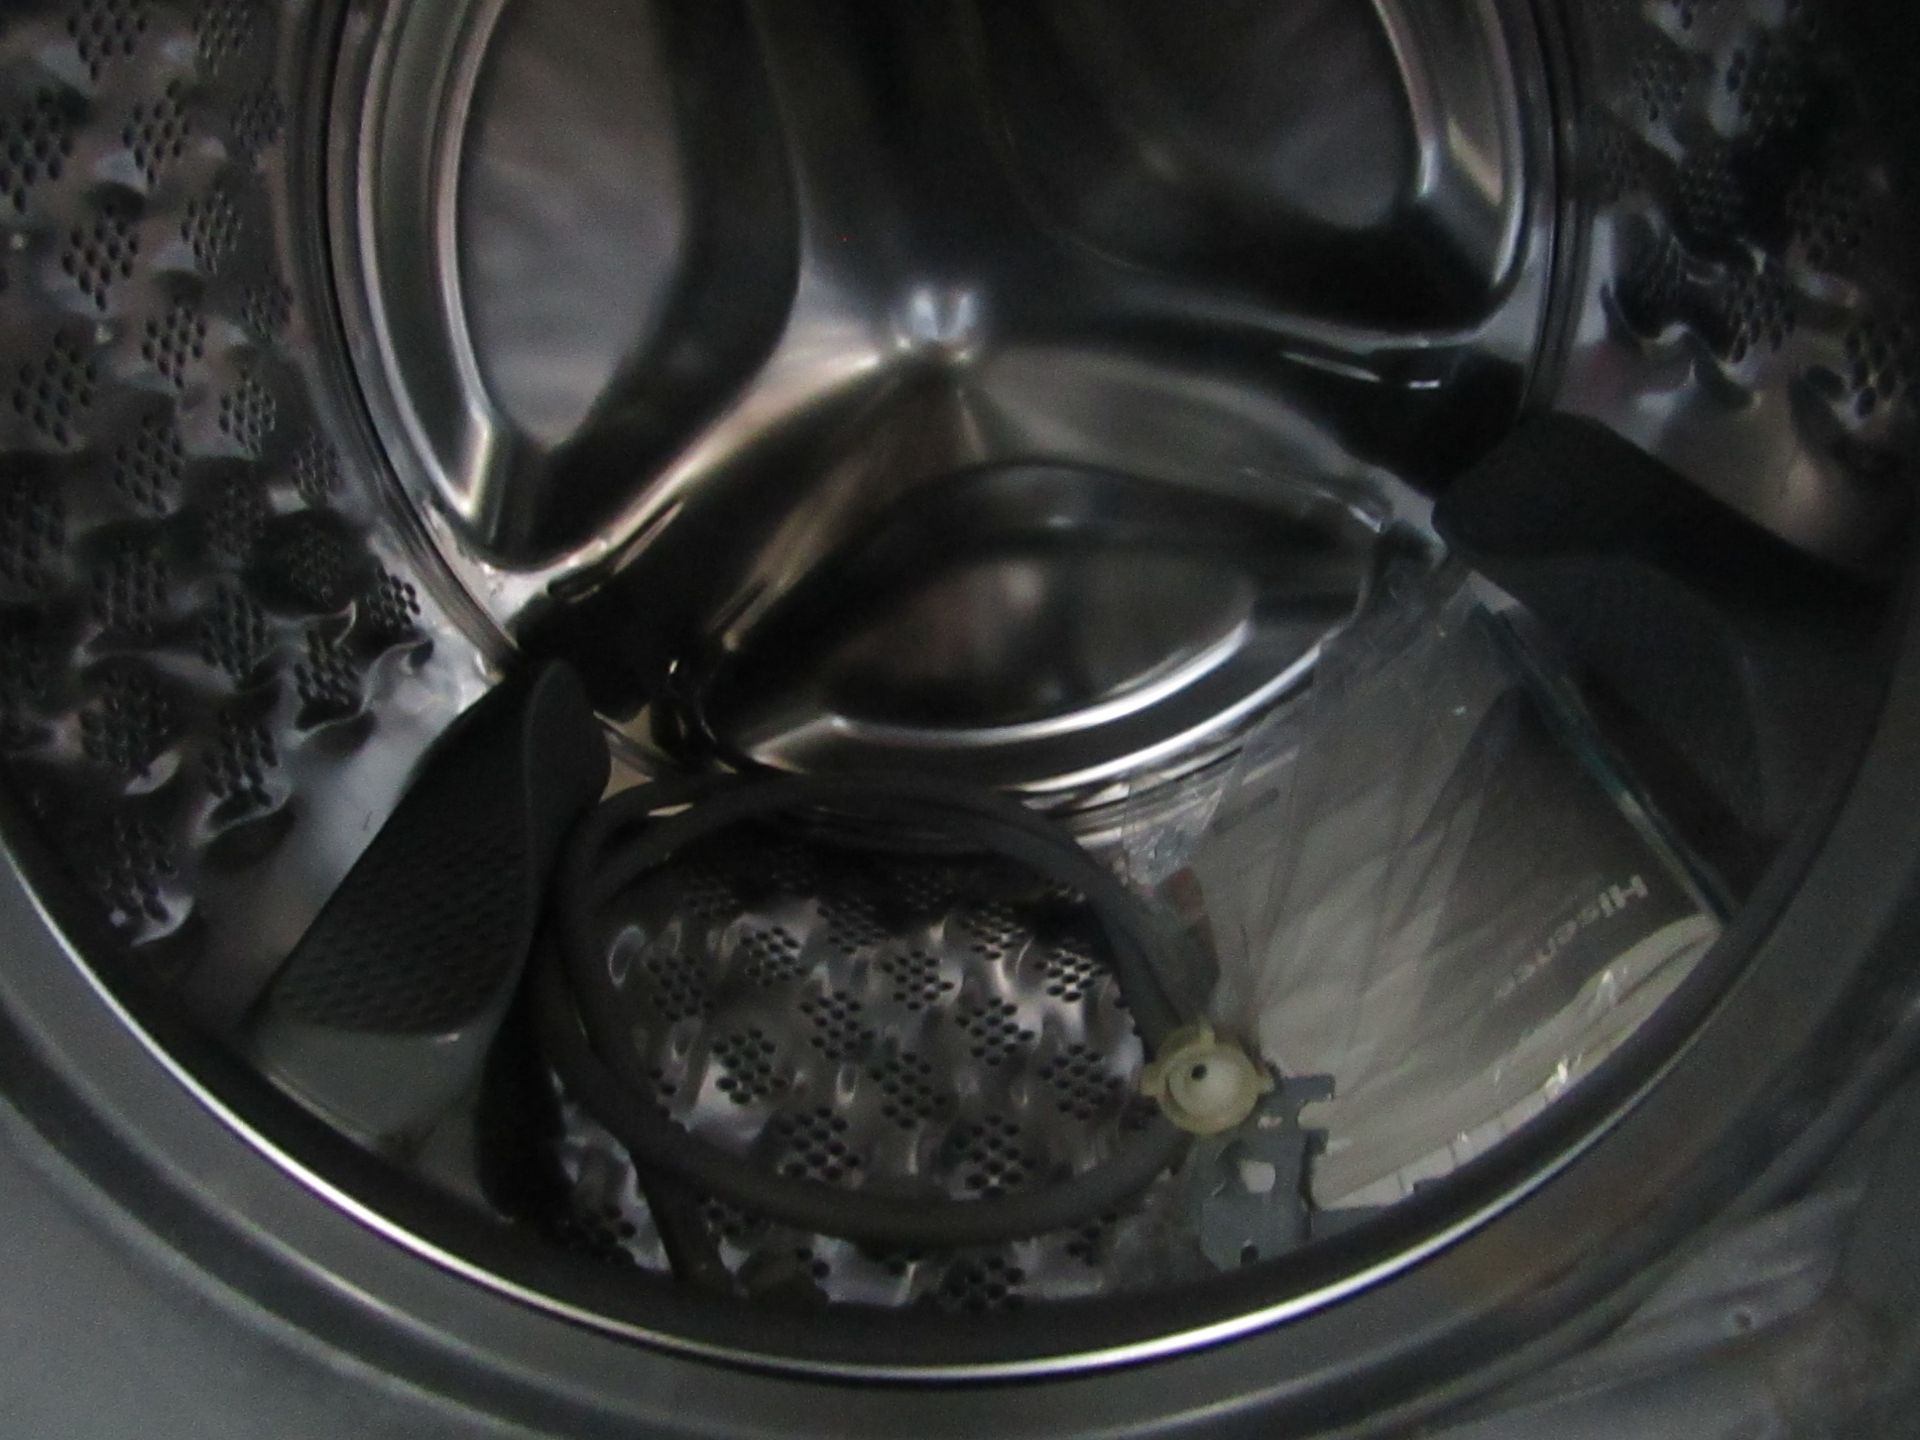 Hisense steam mix 9Kg washing machine, powers on and spins. - Image 2 of 2